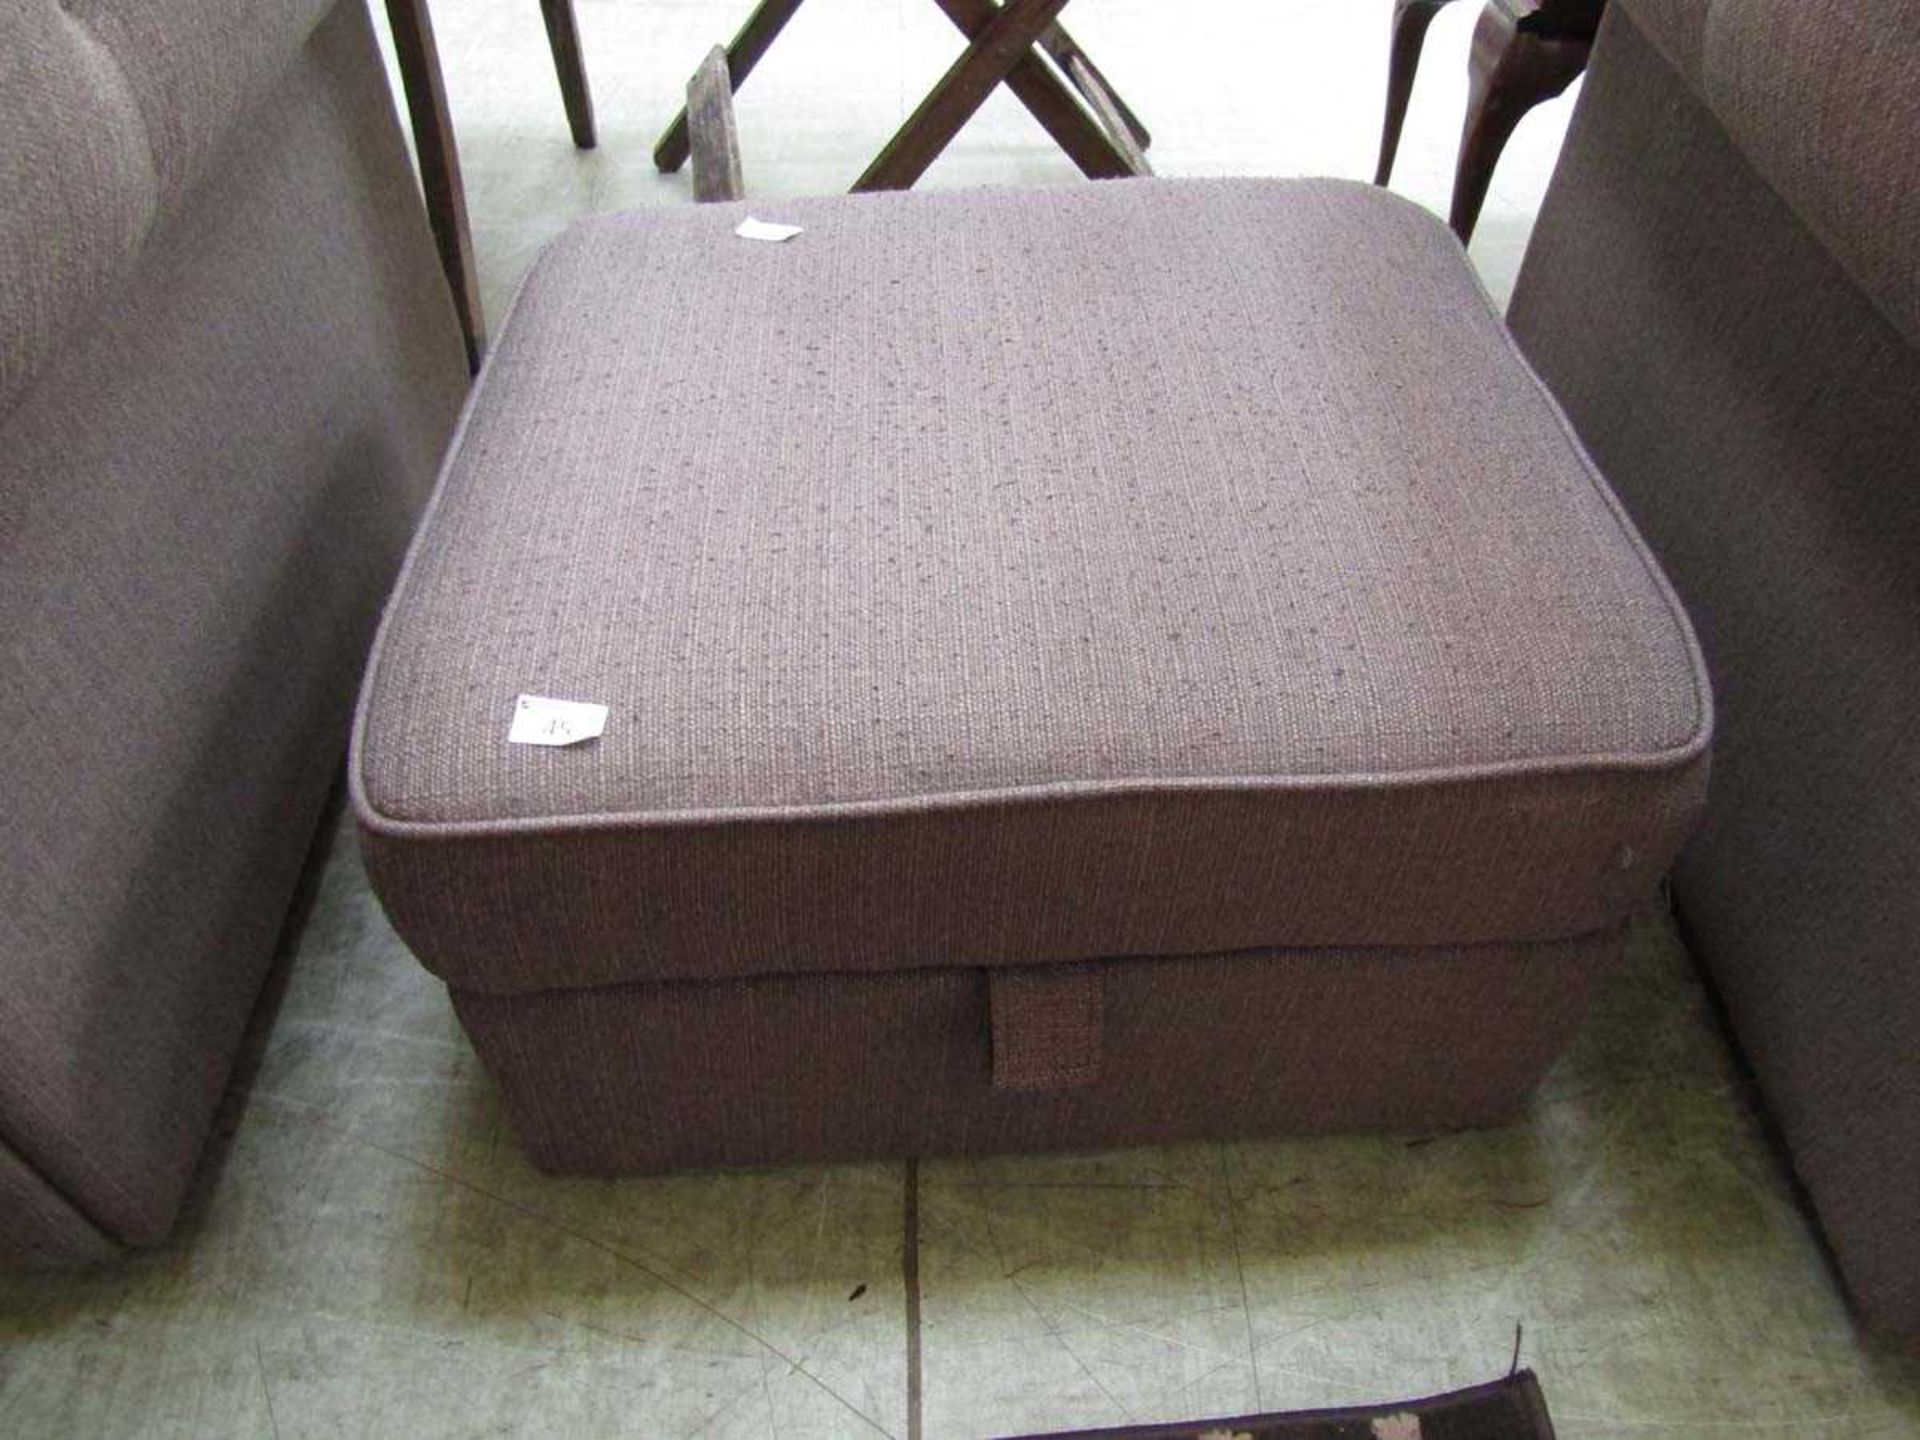 A brown upholstered modern pouffe with lift up lid concealing storage space